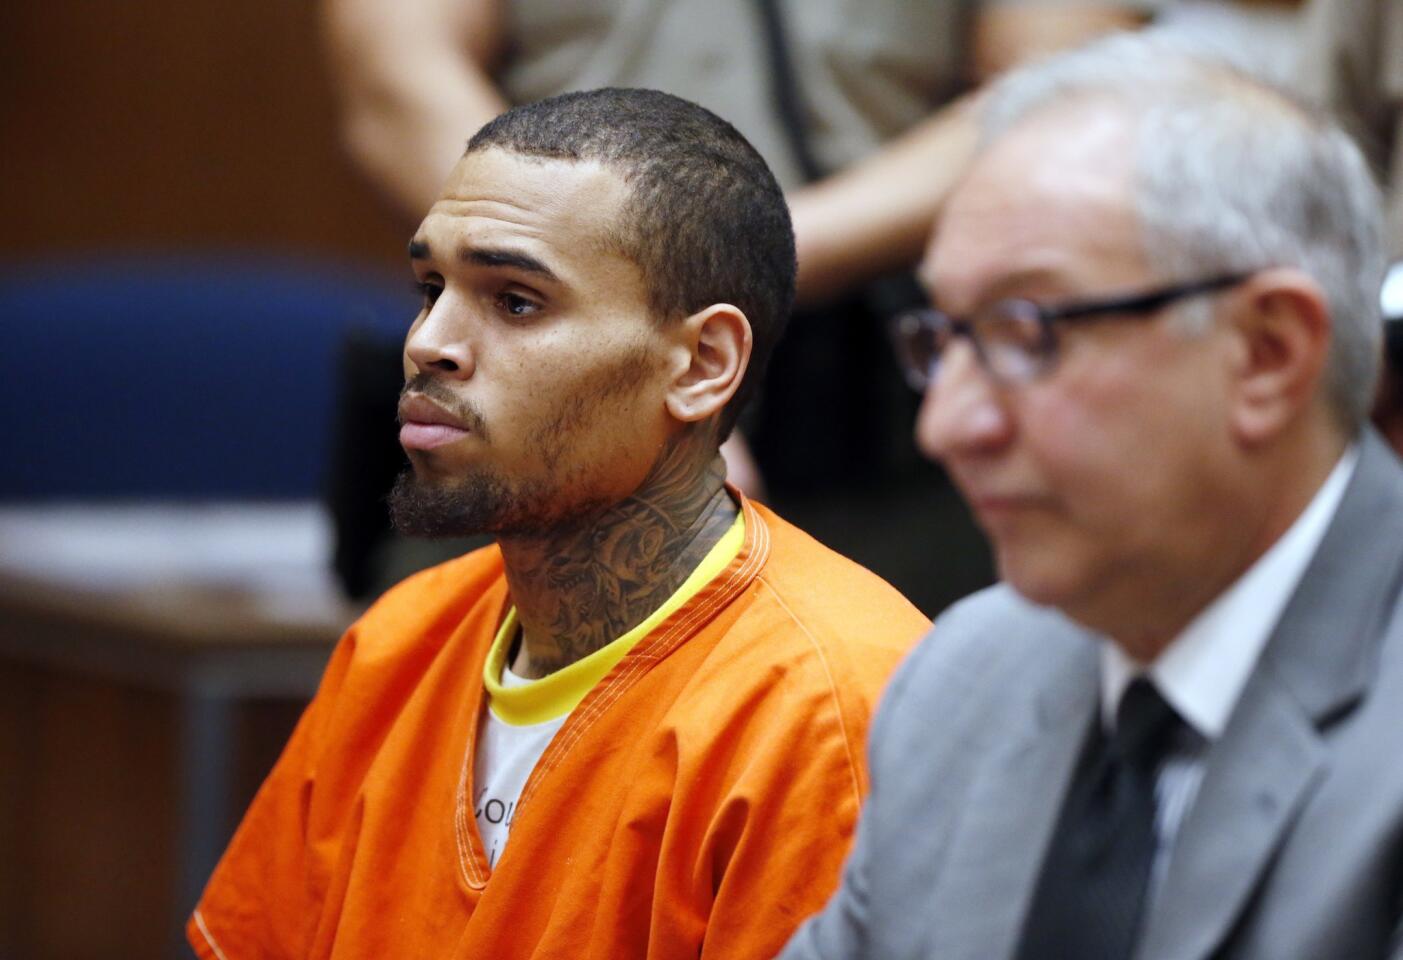 Singer Chris Brown appears in court with his attorney Mark Geragos on Monday for a probation violation hearing.